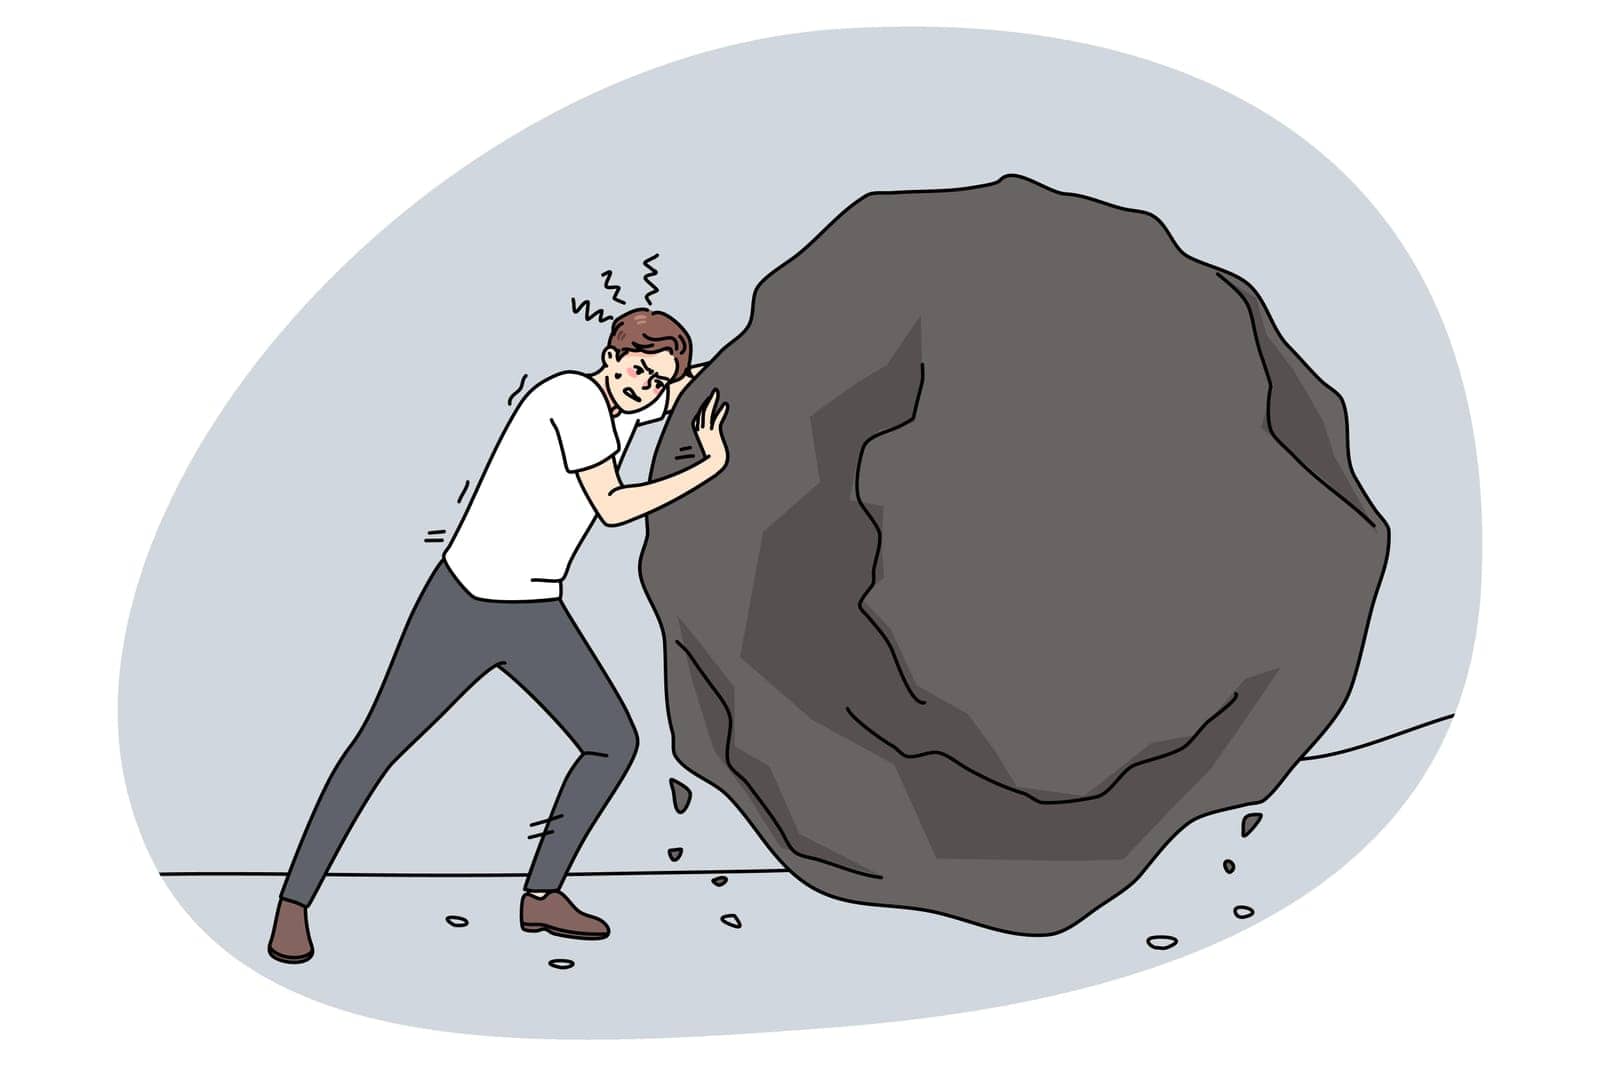 Ambition strong businessman push huge stone reach achieve business goals. Man employee pushing heavy rock or boulder. Obstacles and challenge at work. Flat vector illustration.